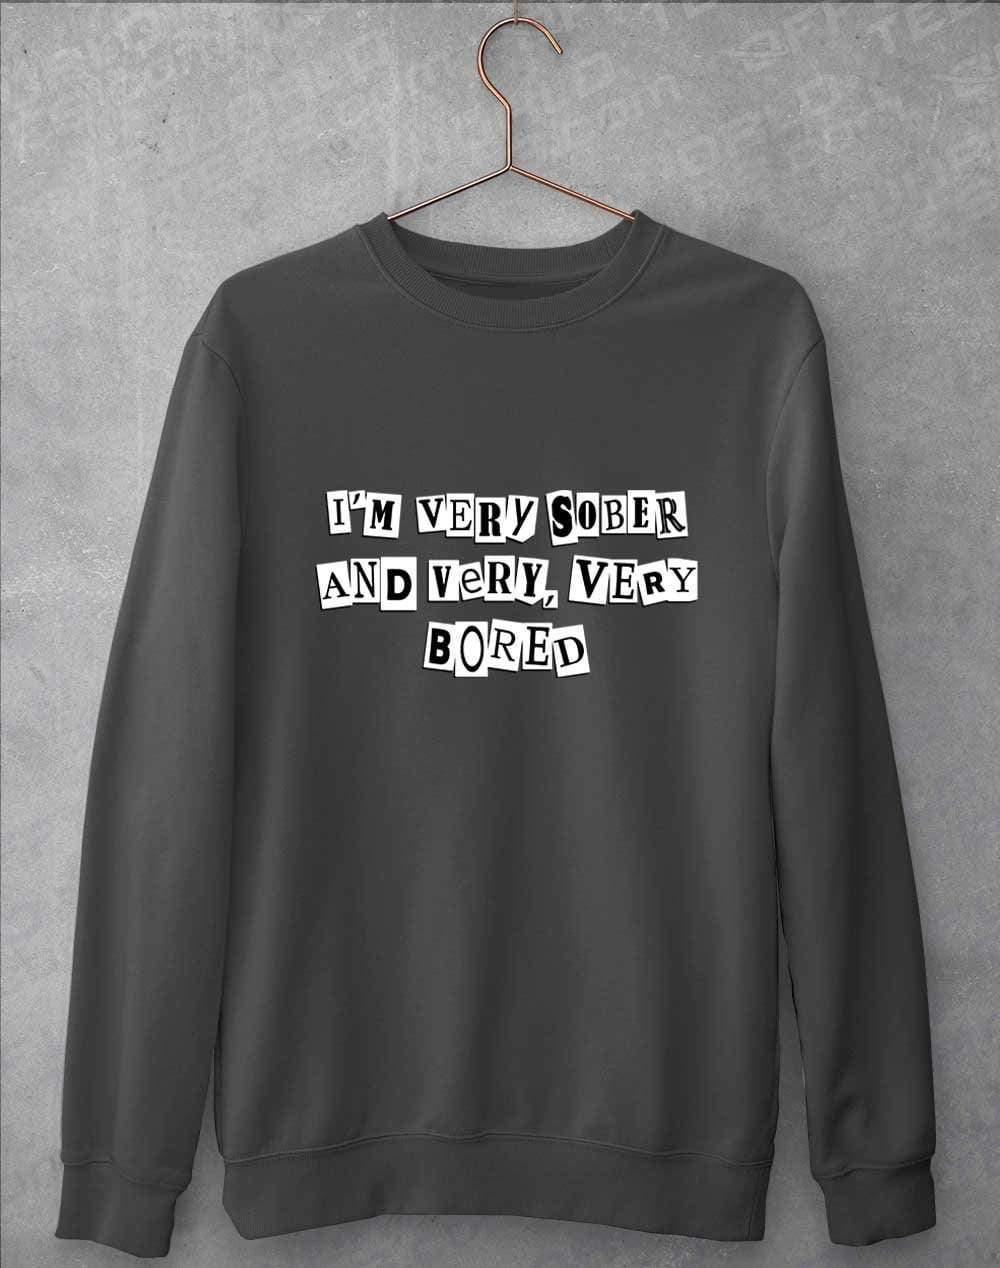 I'm Very Sober and Very Very Bored Sweatshirt S / Charcoal  - Off World Tees